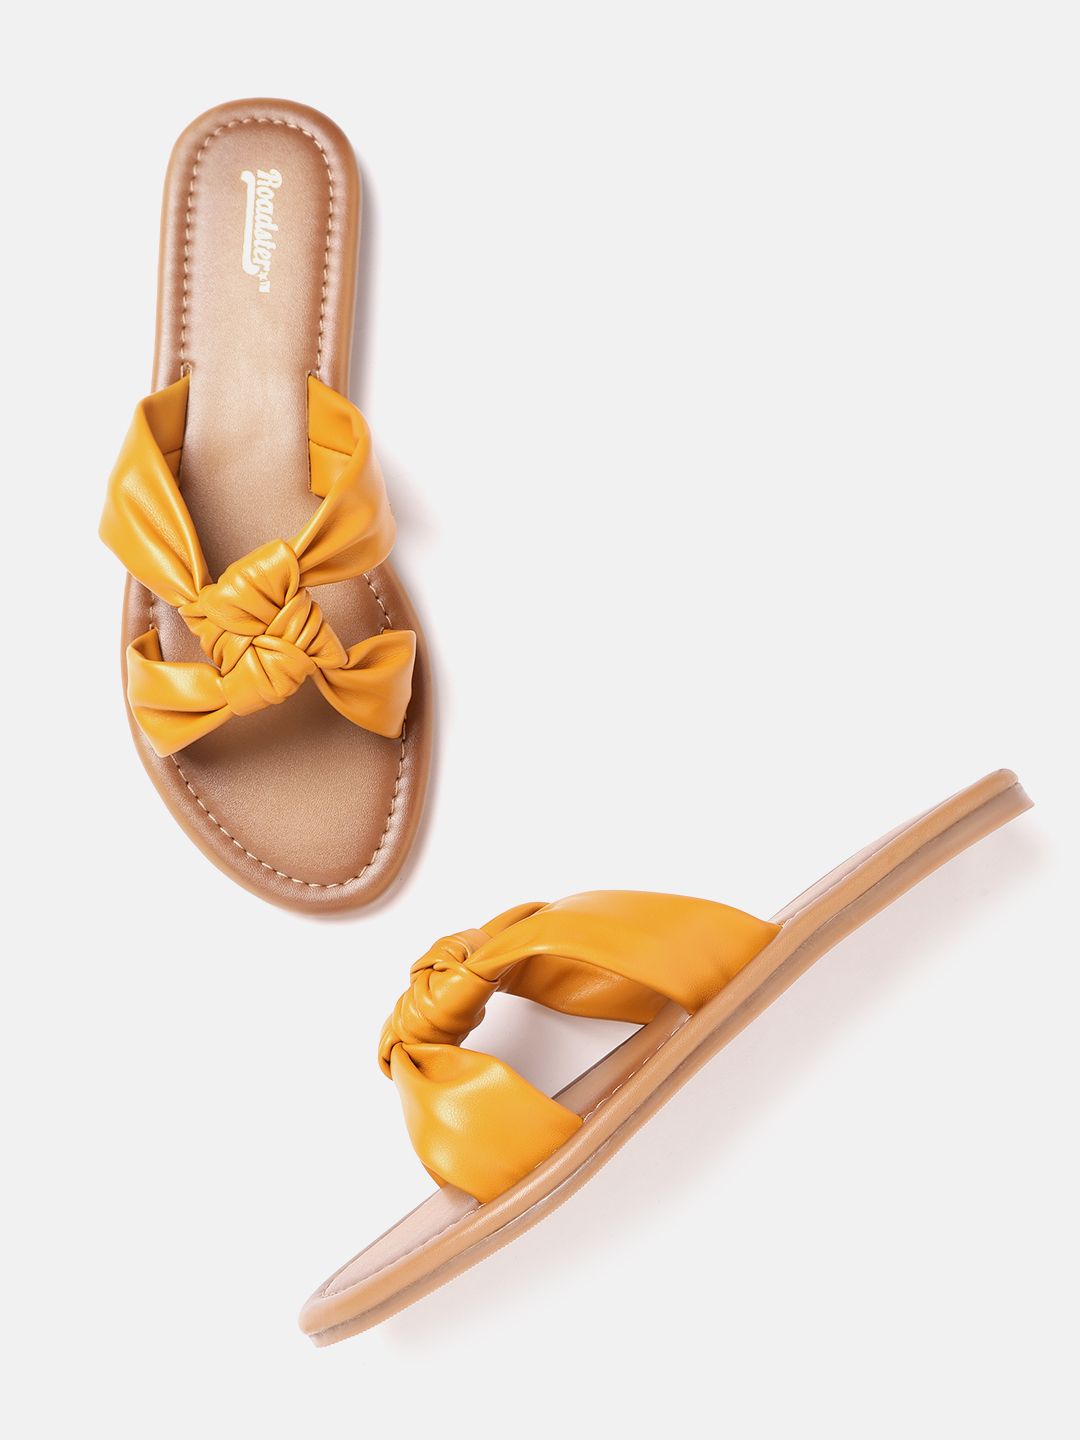 The Roadster Lifestyle Co Women Mustard Yellow Solid Open Toe Flats with Knot Detail Price in India